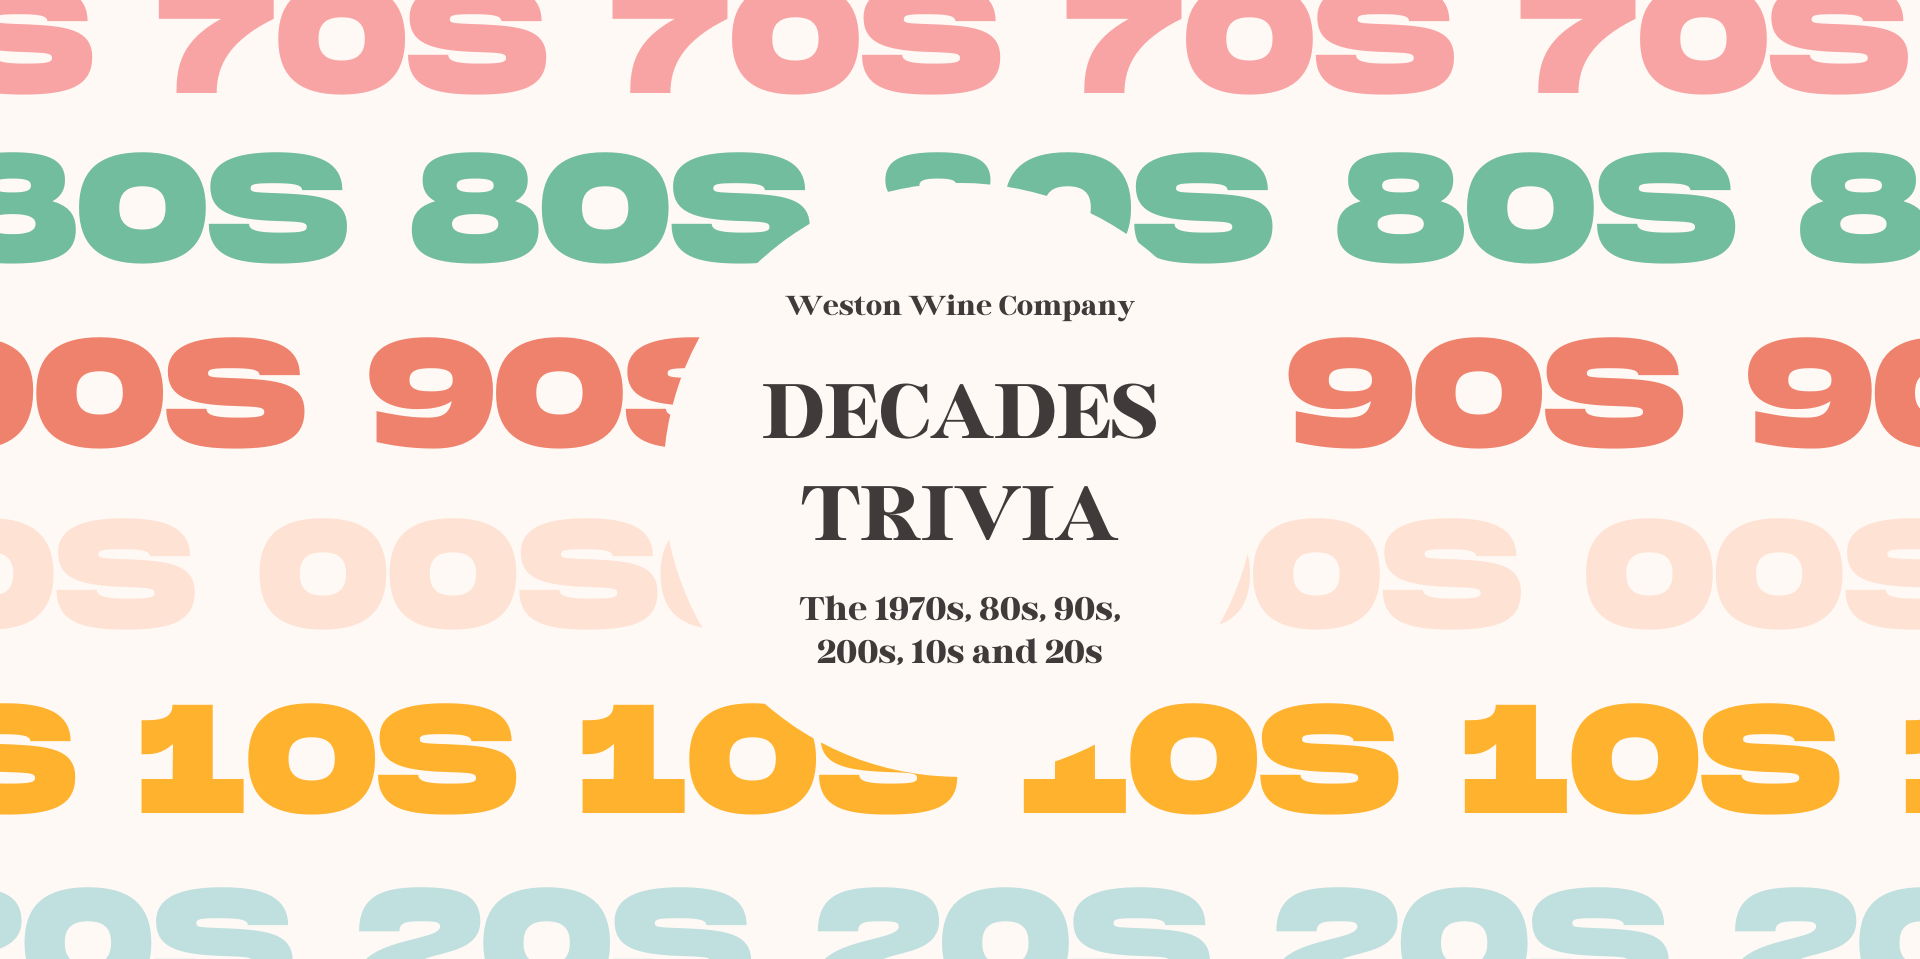 Trivia Through the Decades promotional image